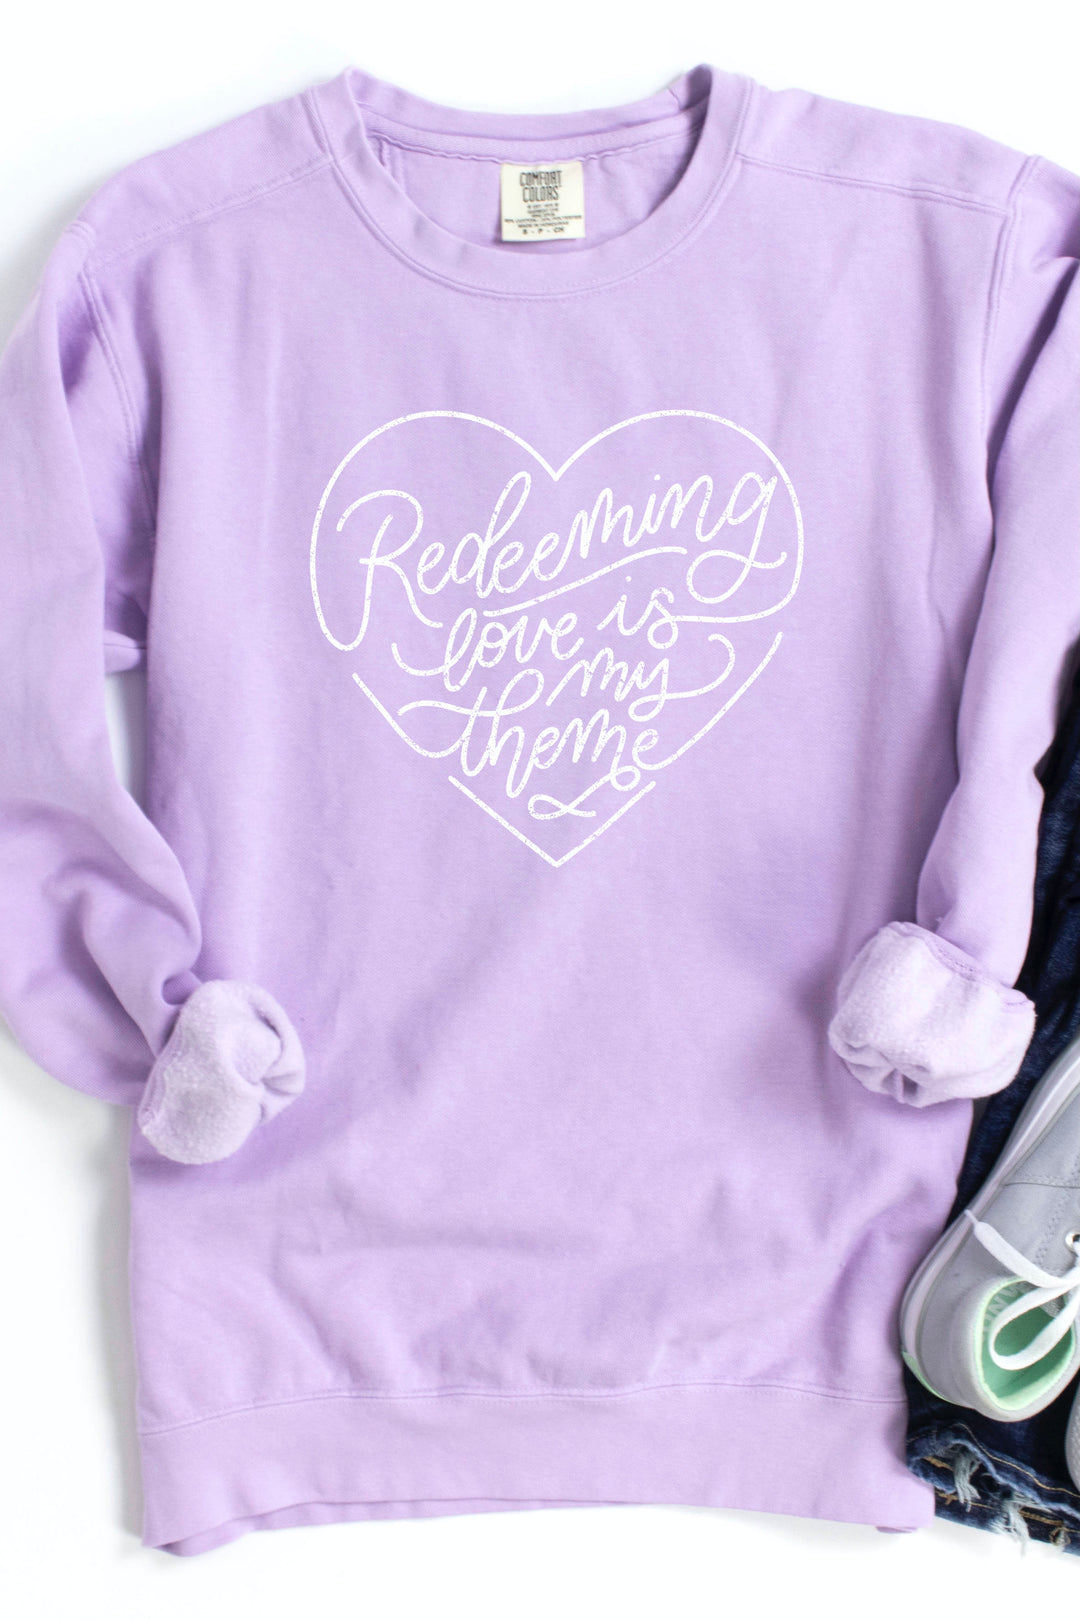 "Redeeming Love Is My Theme" Crewneck Pullover